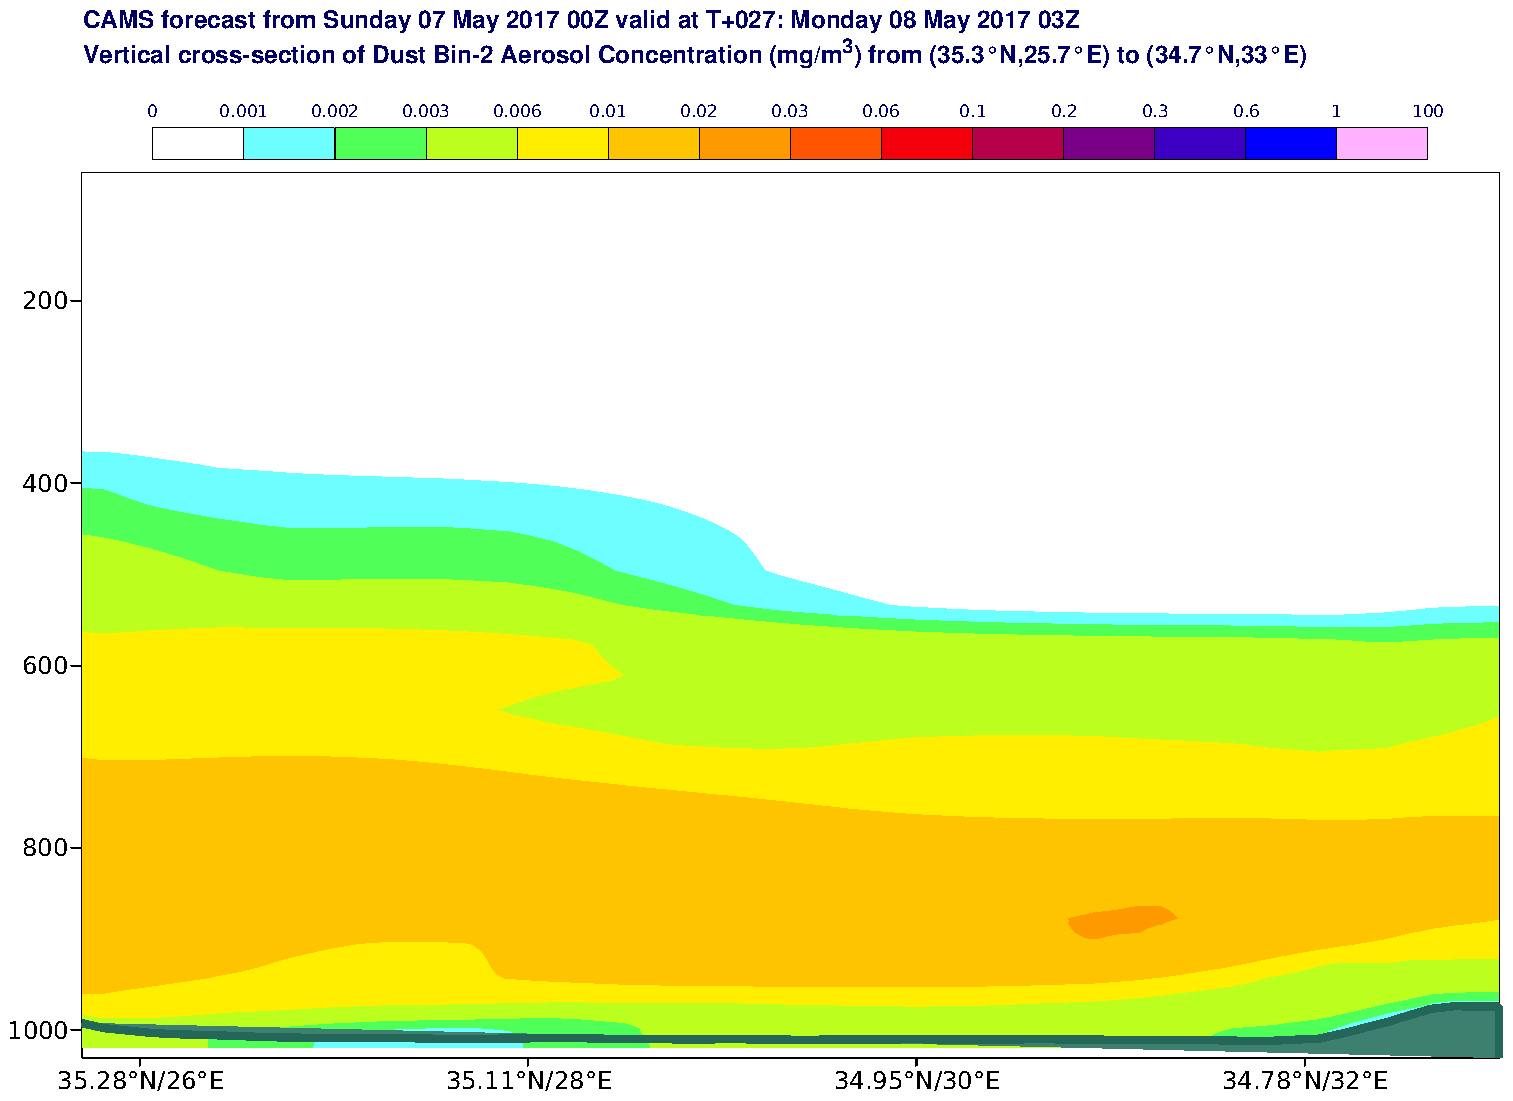 Vertical cross-section of Dust Bin-2 Aerosol Concentration (mg/m3) valid at T27 - 2017-05-08 03:00